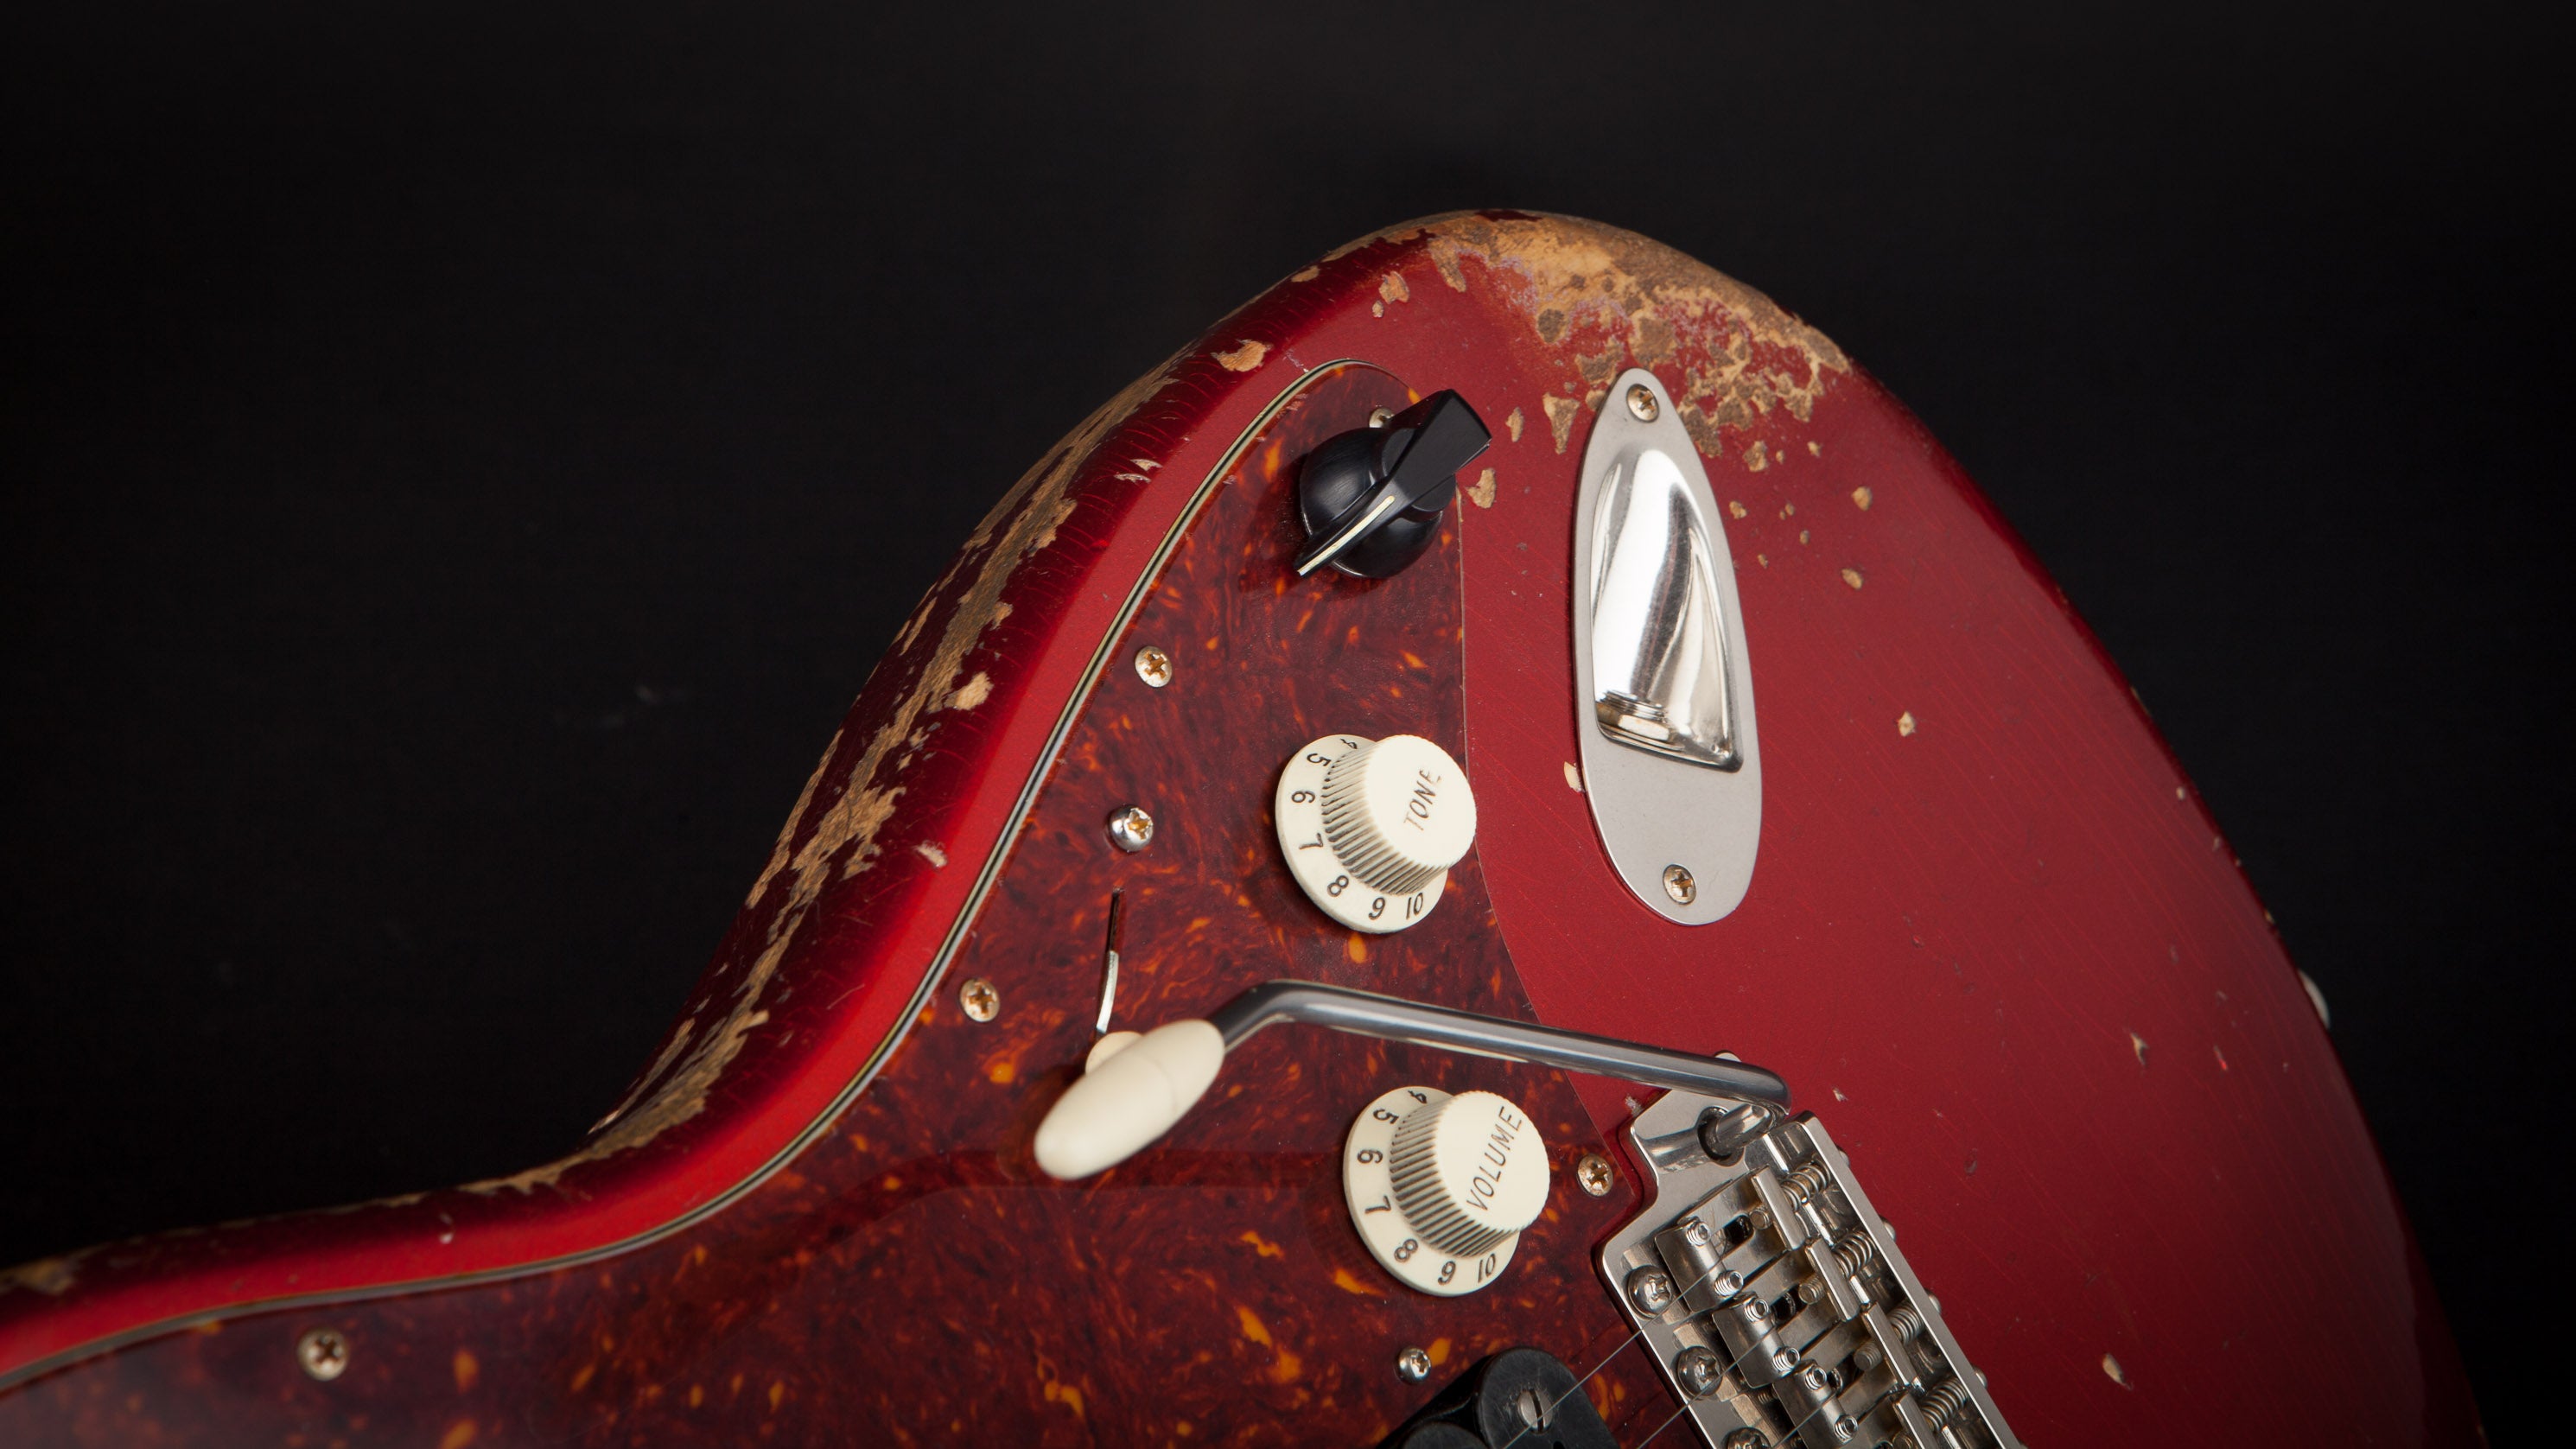 Luxxtone Guitars: Choppa S Candy Apple Red #381